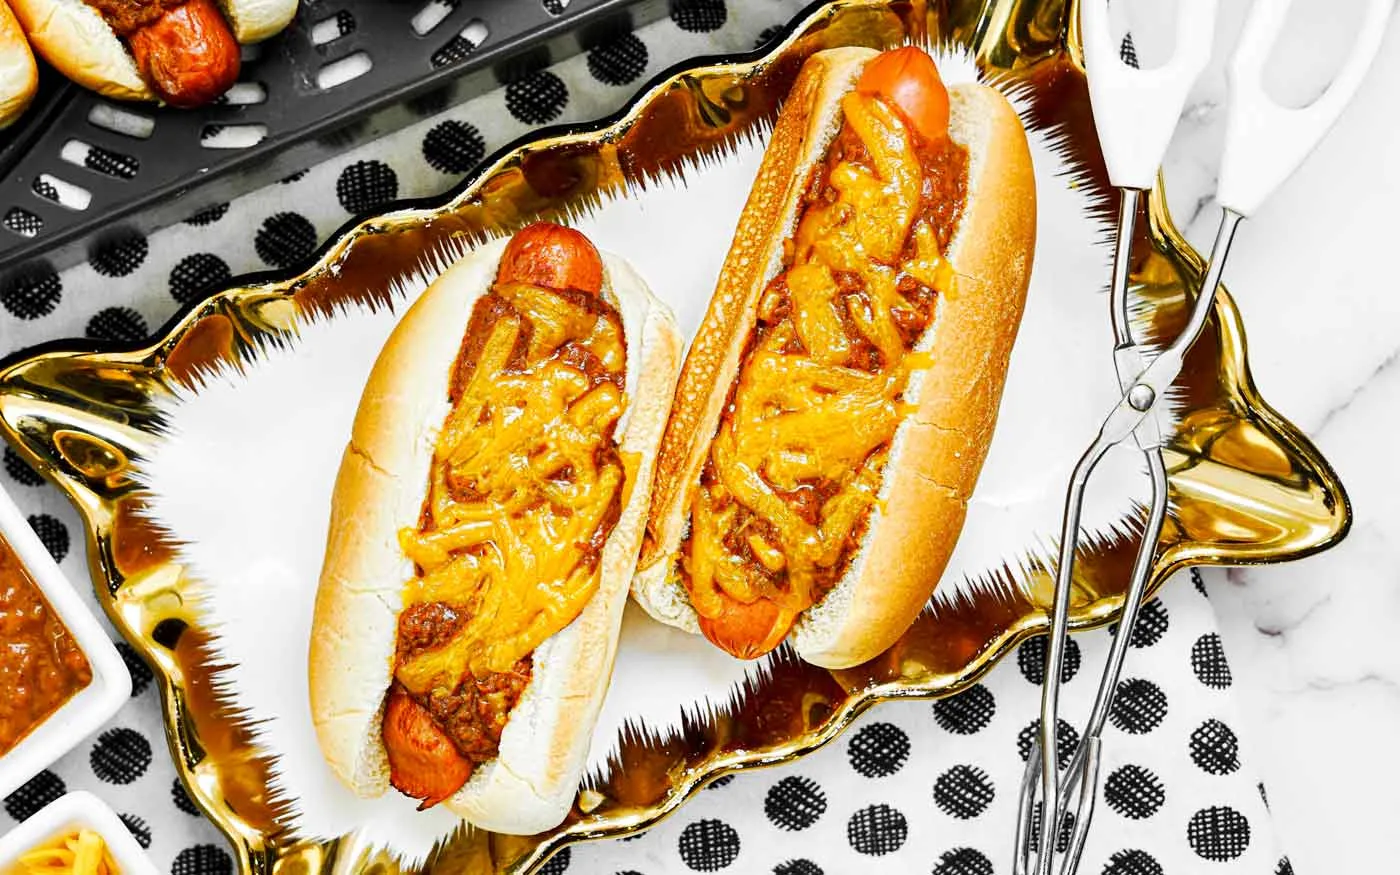 Air fryer hot dogs with chili and cheese on a serving plate.